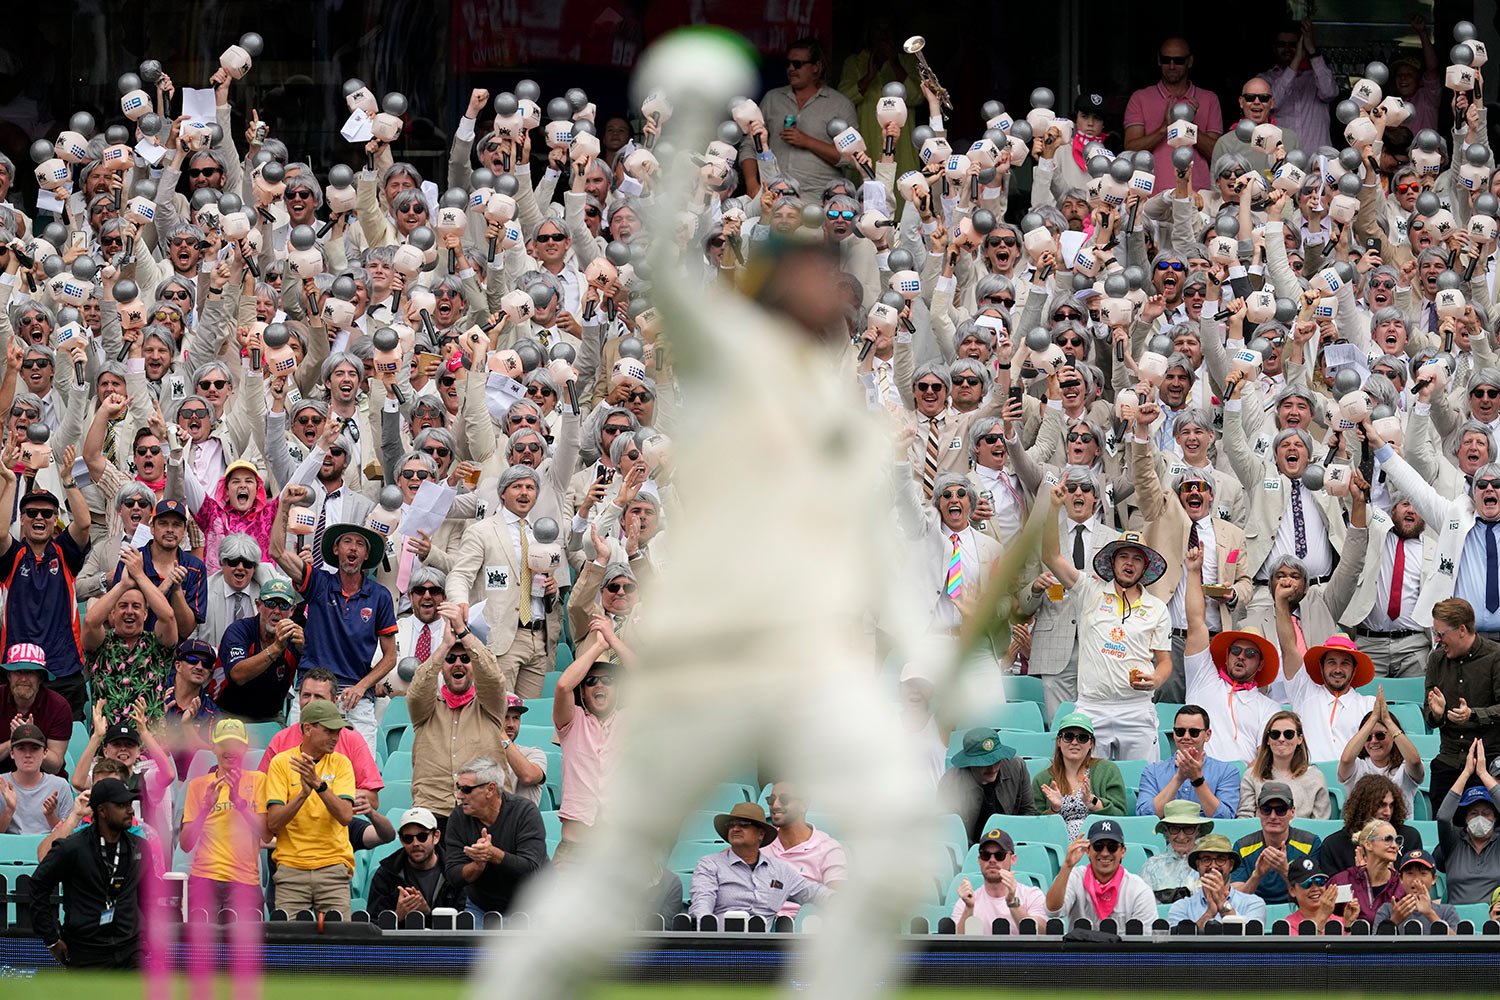  Fans known as "The Richies" cheer as Australia's Usman Khawaja celebrates with making 100 runs against South Africa during the second day of their cricket test match at the Sydney Cricket Ground in Sydney, Thursday, Jan. 5, 2023. (AP Photo/Rick Rycr